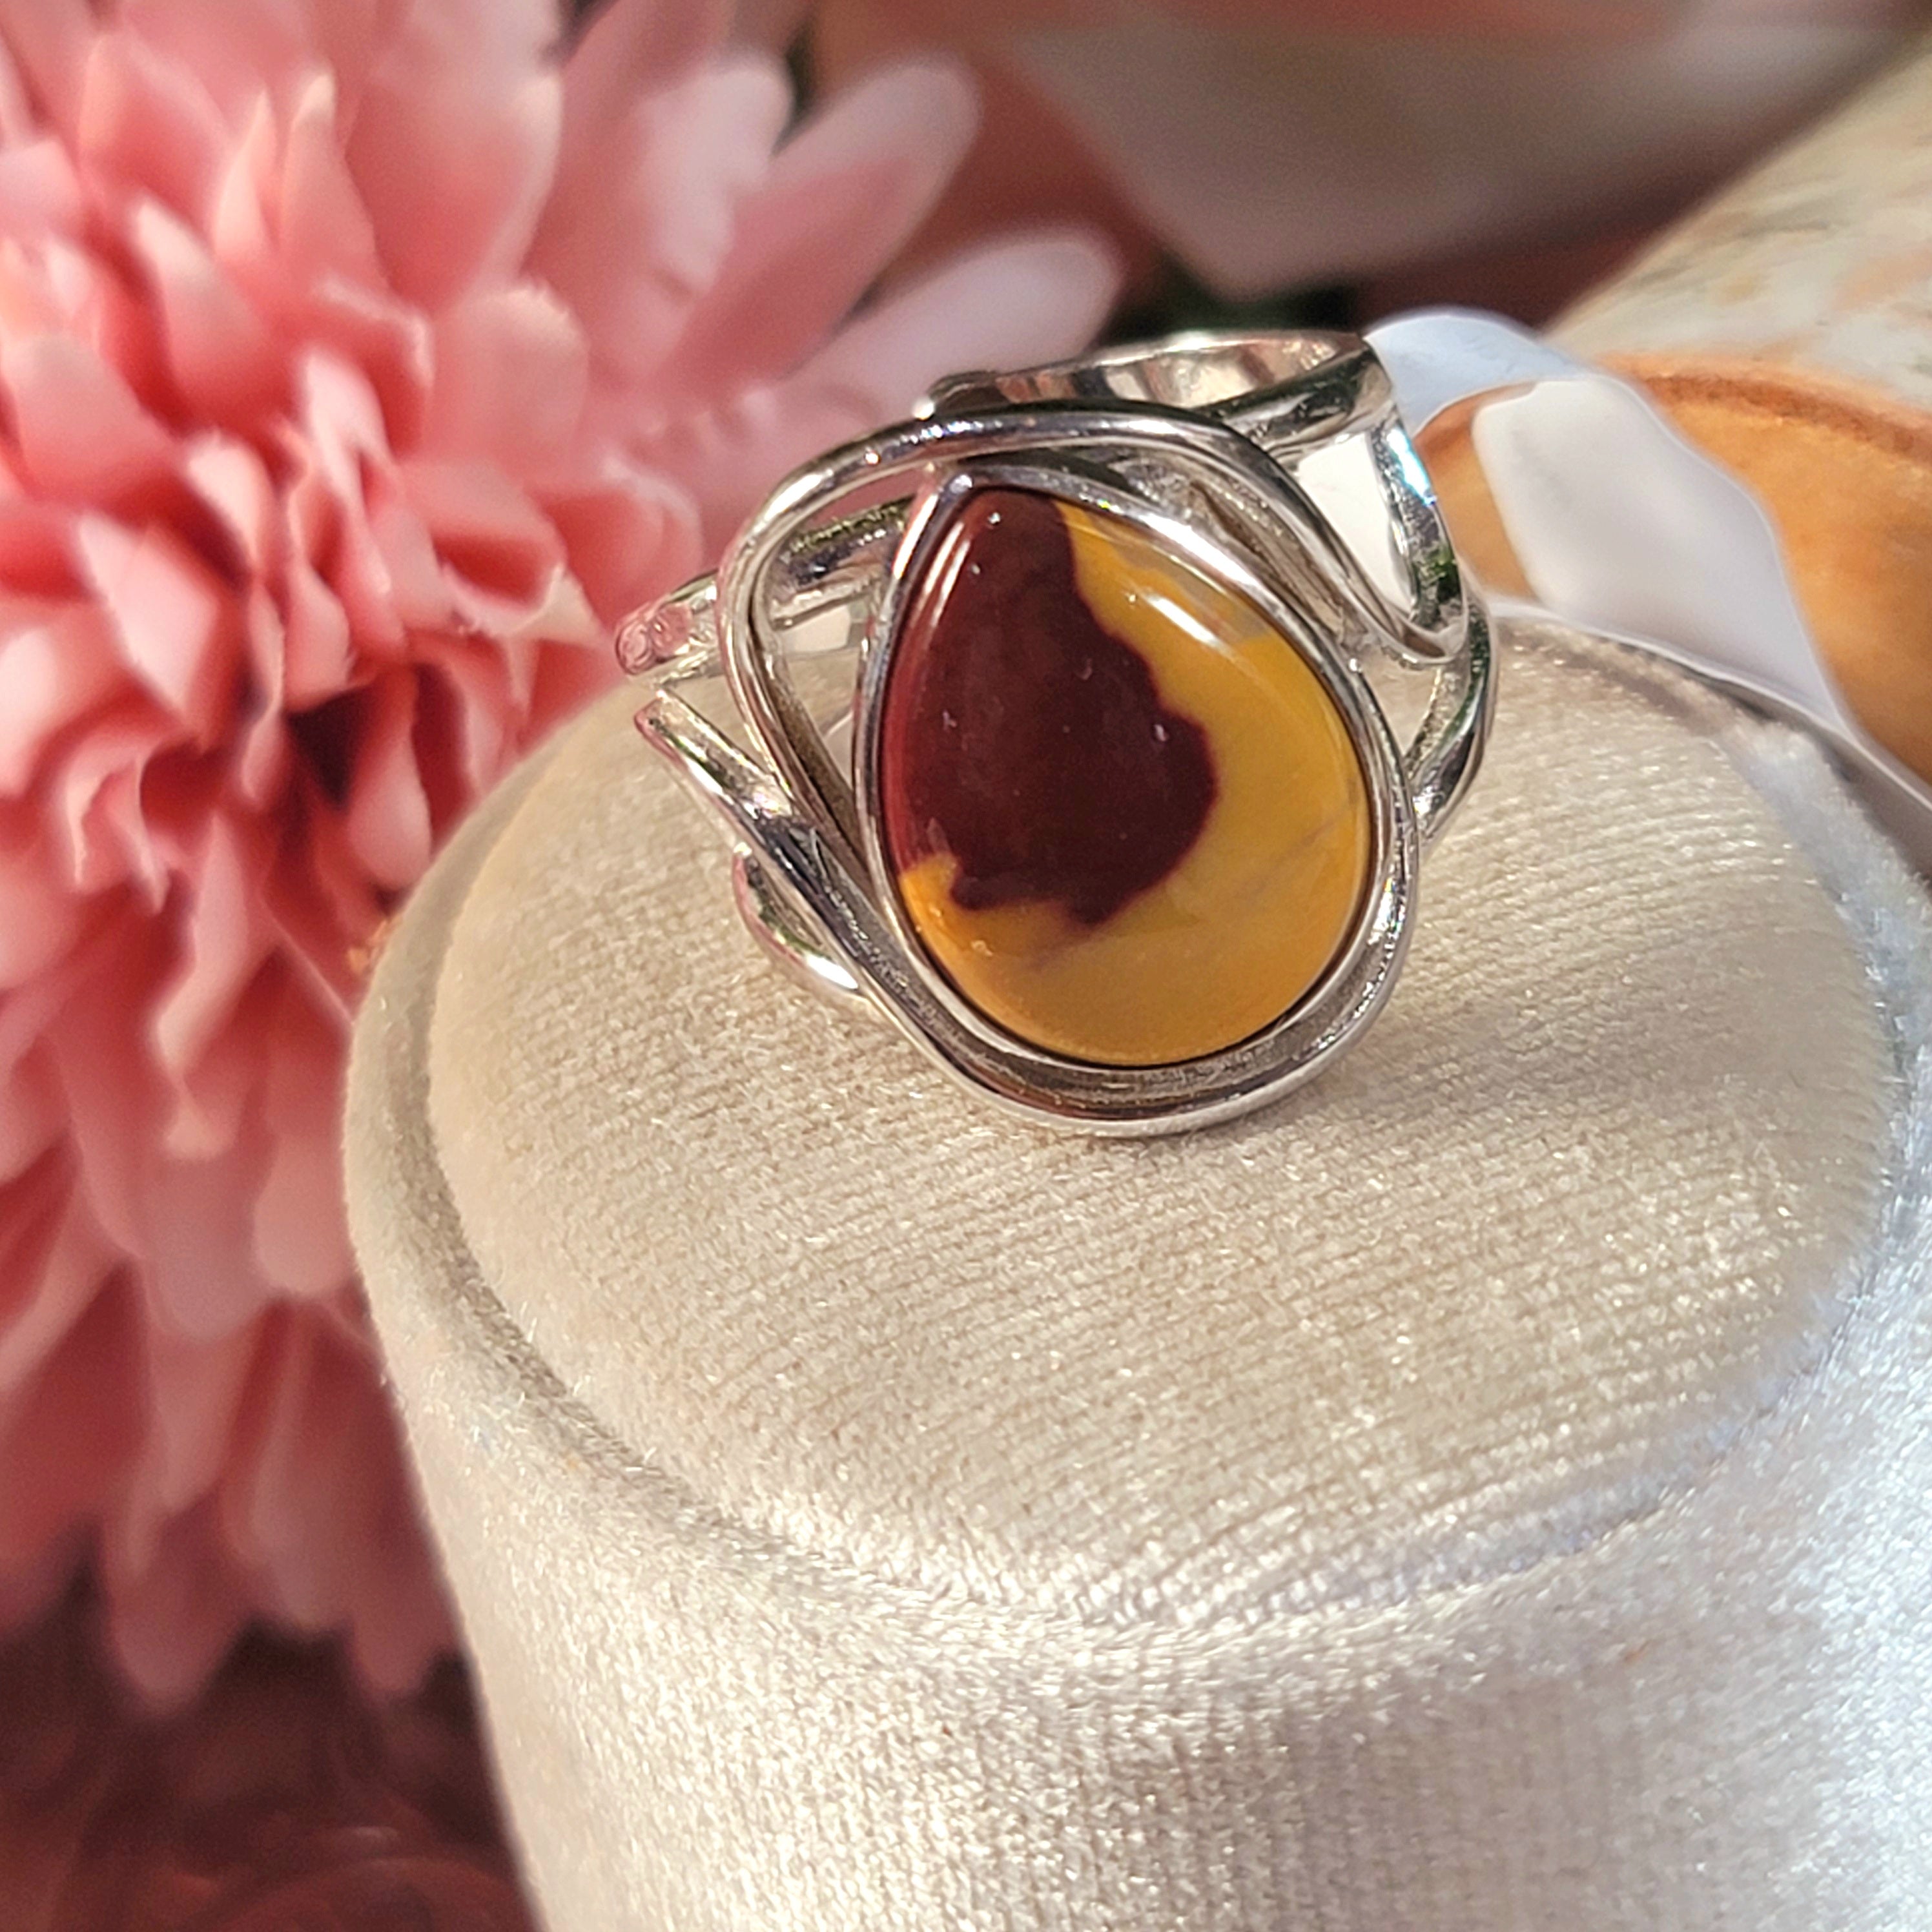 Mookaite Jasper Finger Bracelet Adjustable Ring.925 Silver for Personal Power and Youthful Beauty